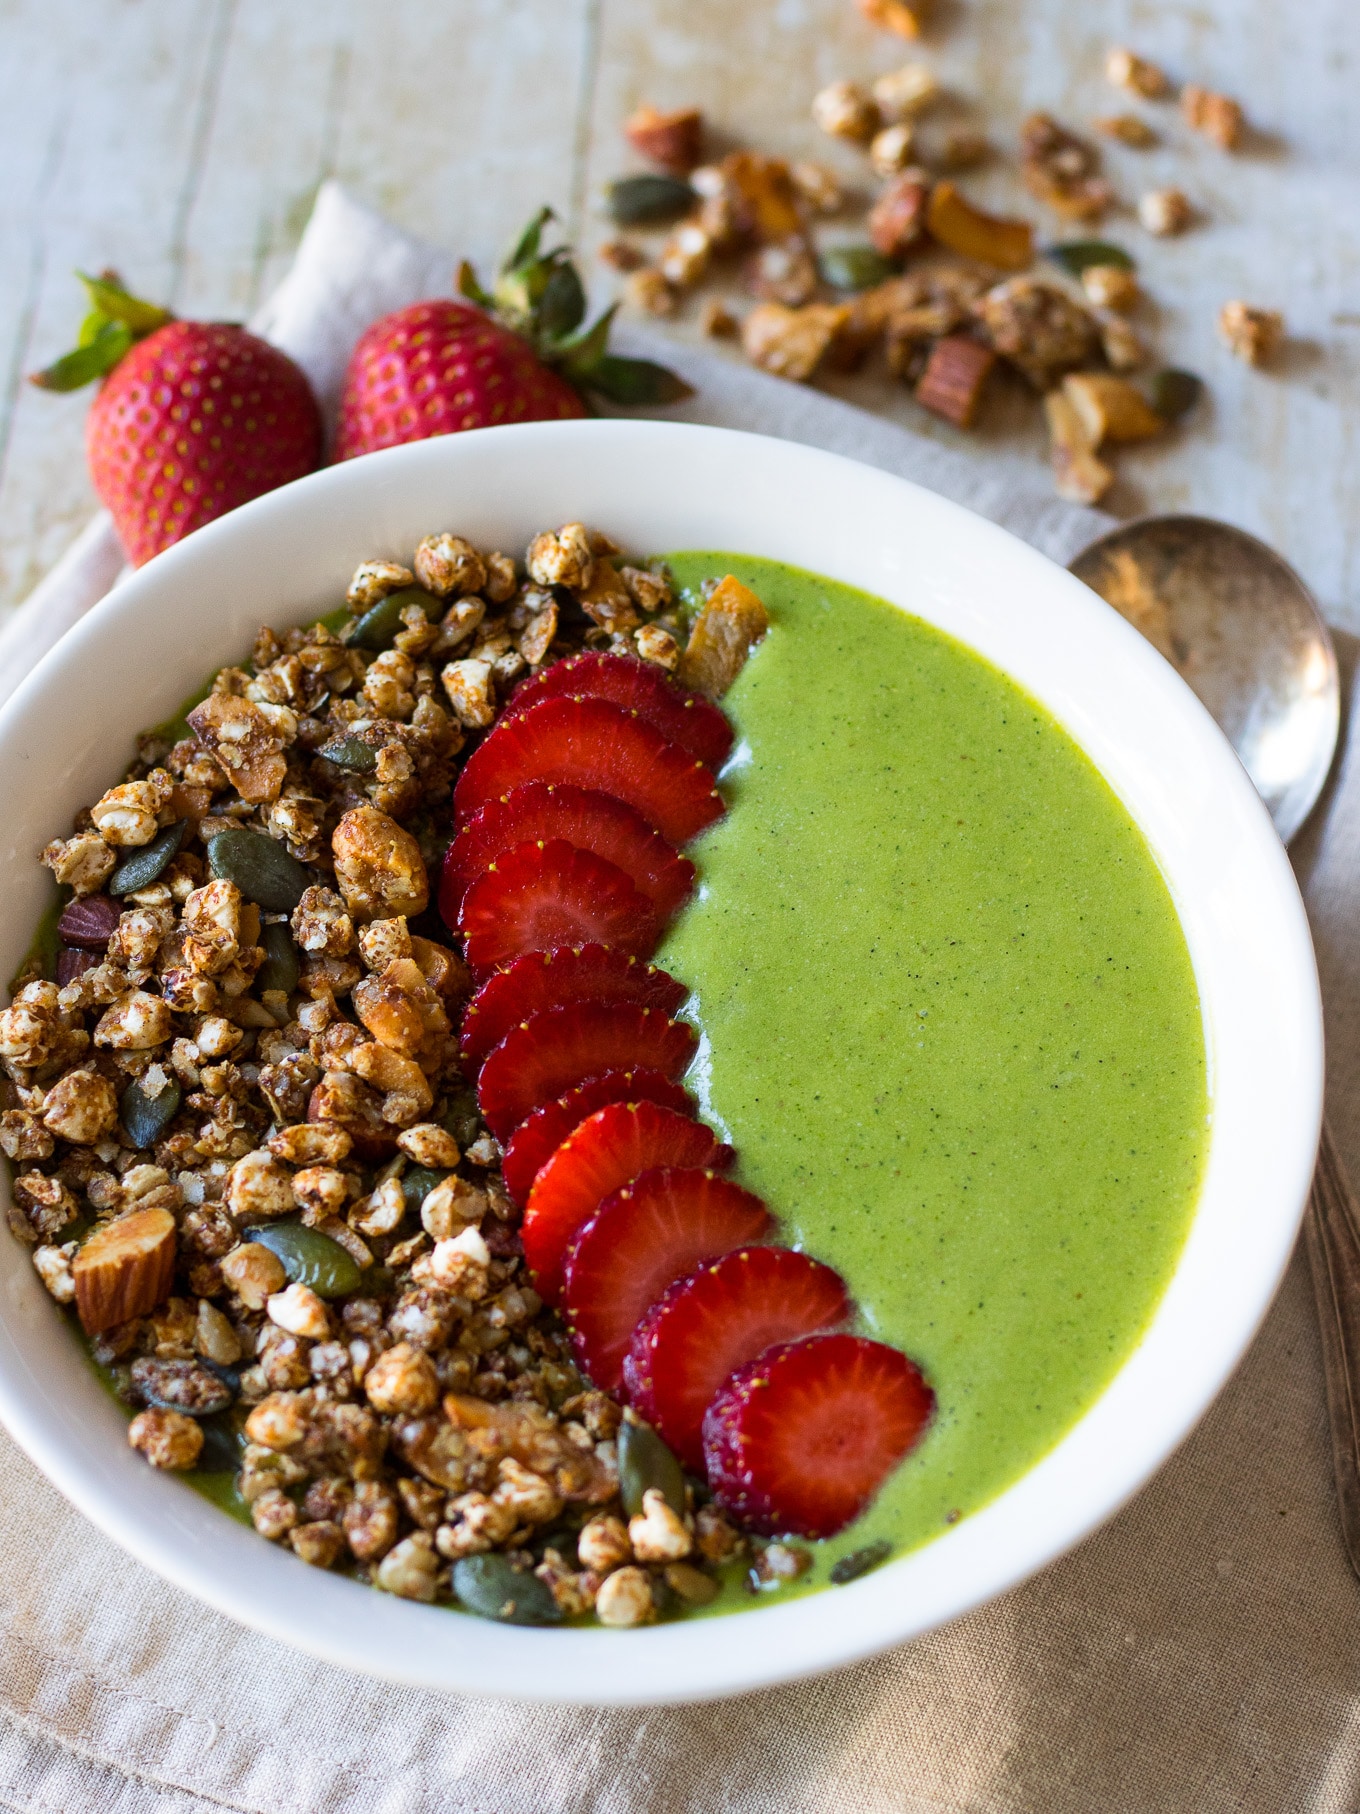 A thick green protein #smoothiebowl is a quick, satisfying healthy breakfast ready in no time. #paleo and #glutenfree, with an easy vegan #dairyfree option too. #greensmoothie 